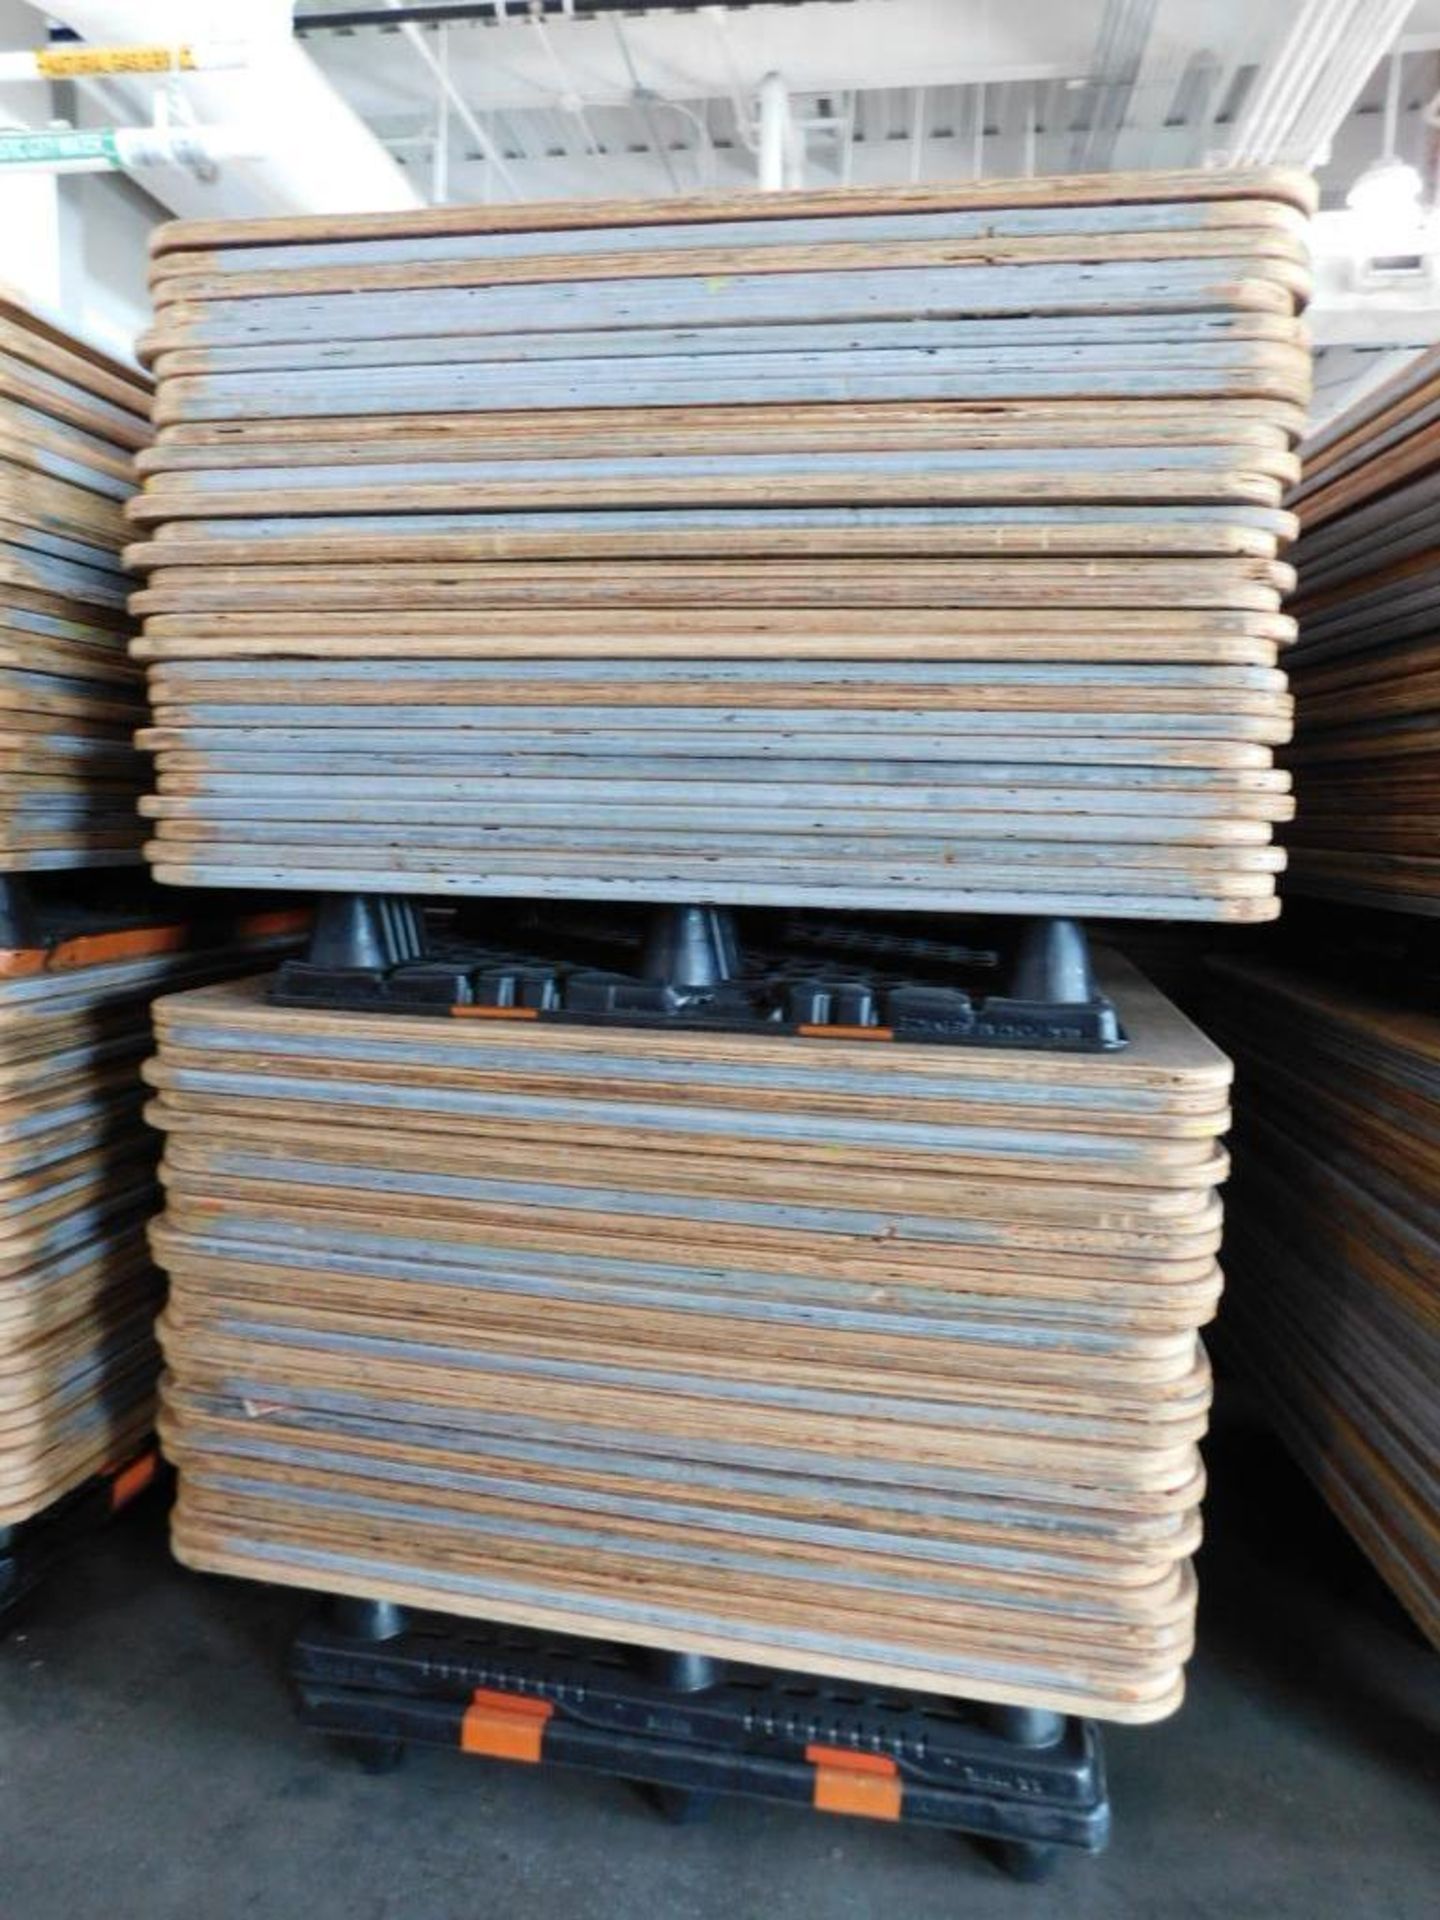 LOT: Large Quantity of 50" x 50" Wood Paper Roll Pallets on (12) Plastic Pallets (LOCATION: IN MAIL - Image 6 of 8